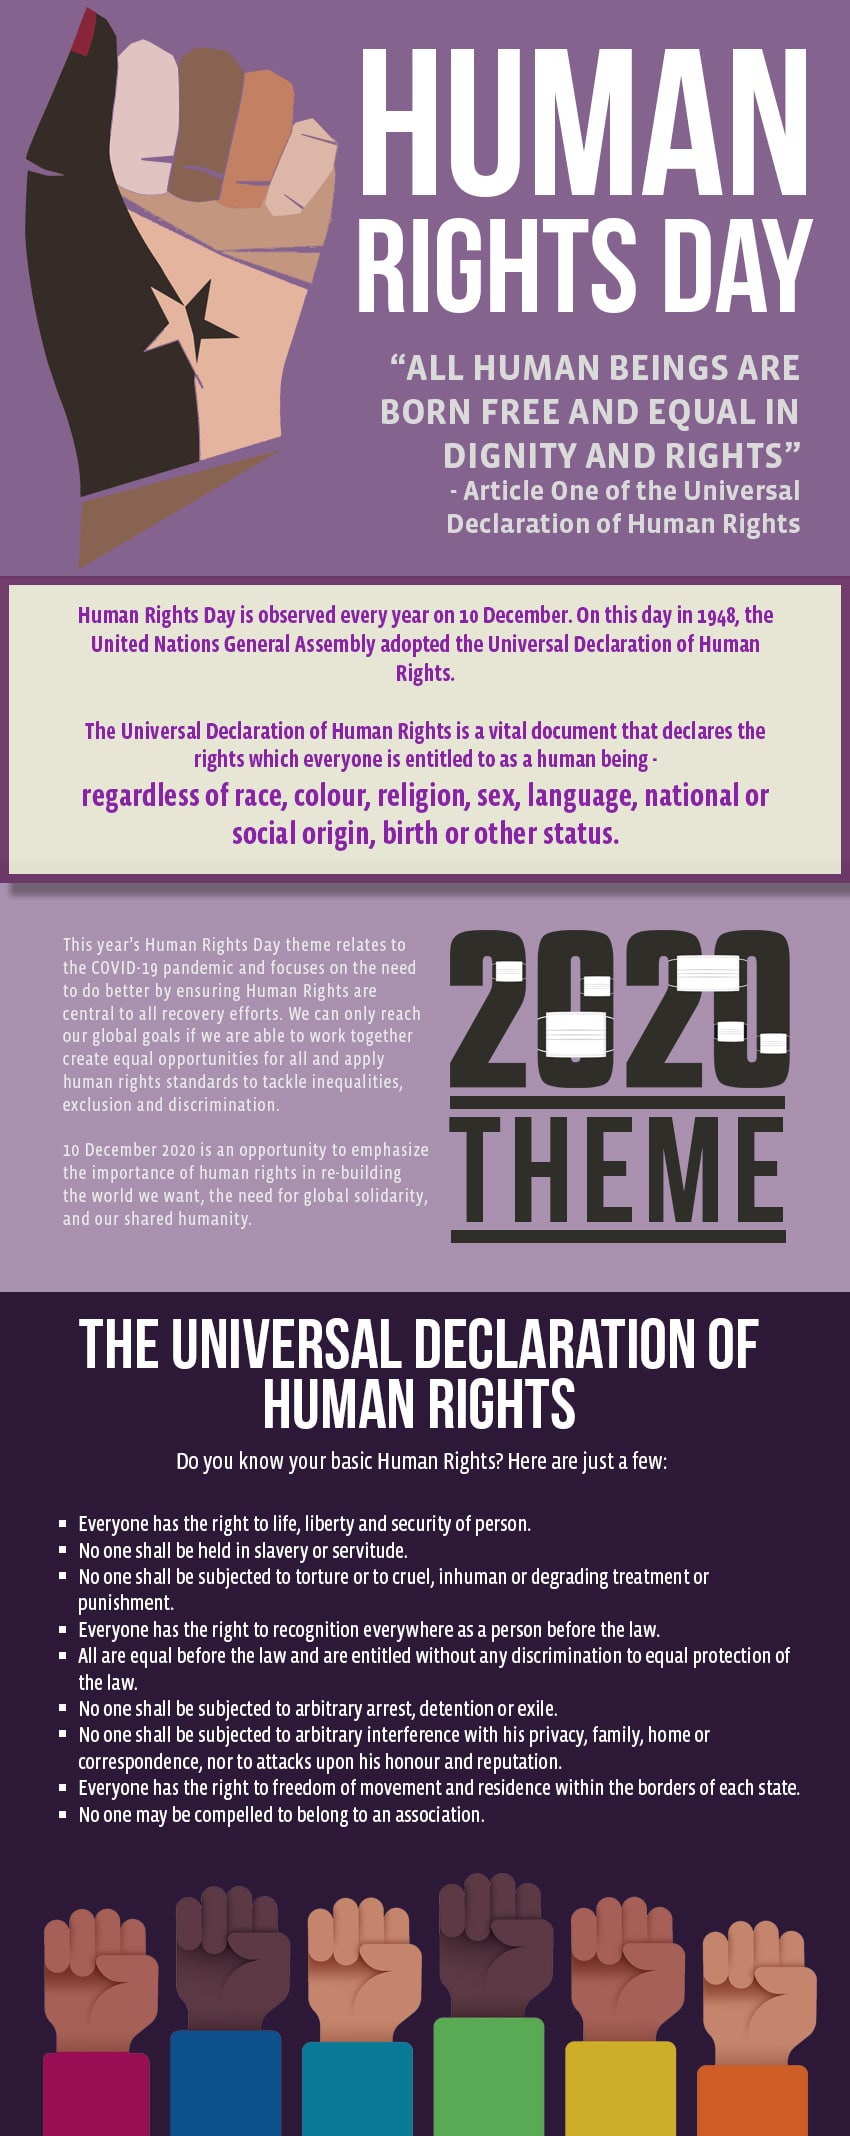 World Human Rights Day 2020 Infographic by University of the People